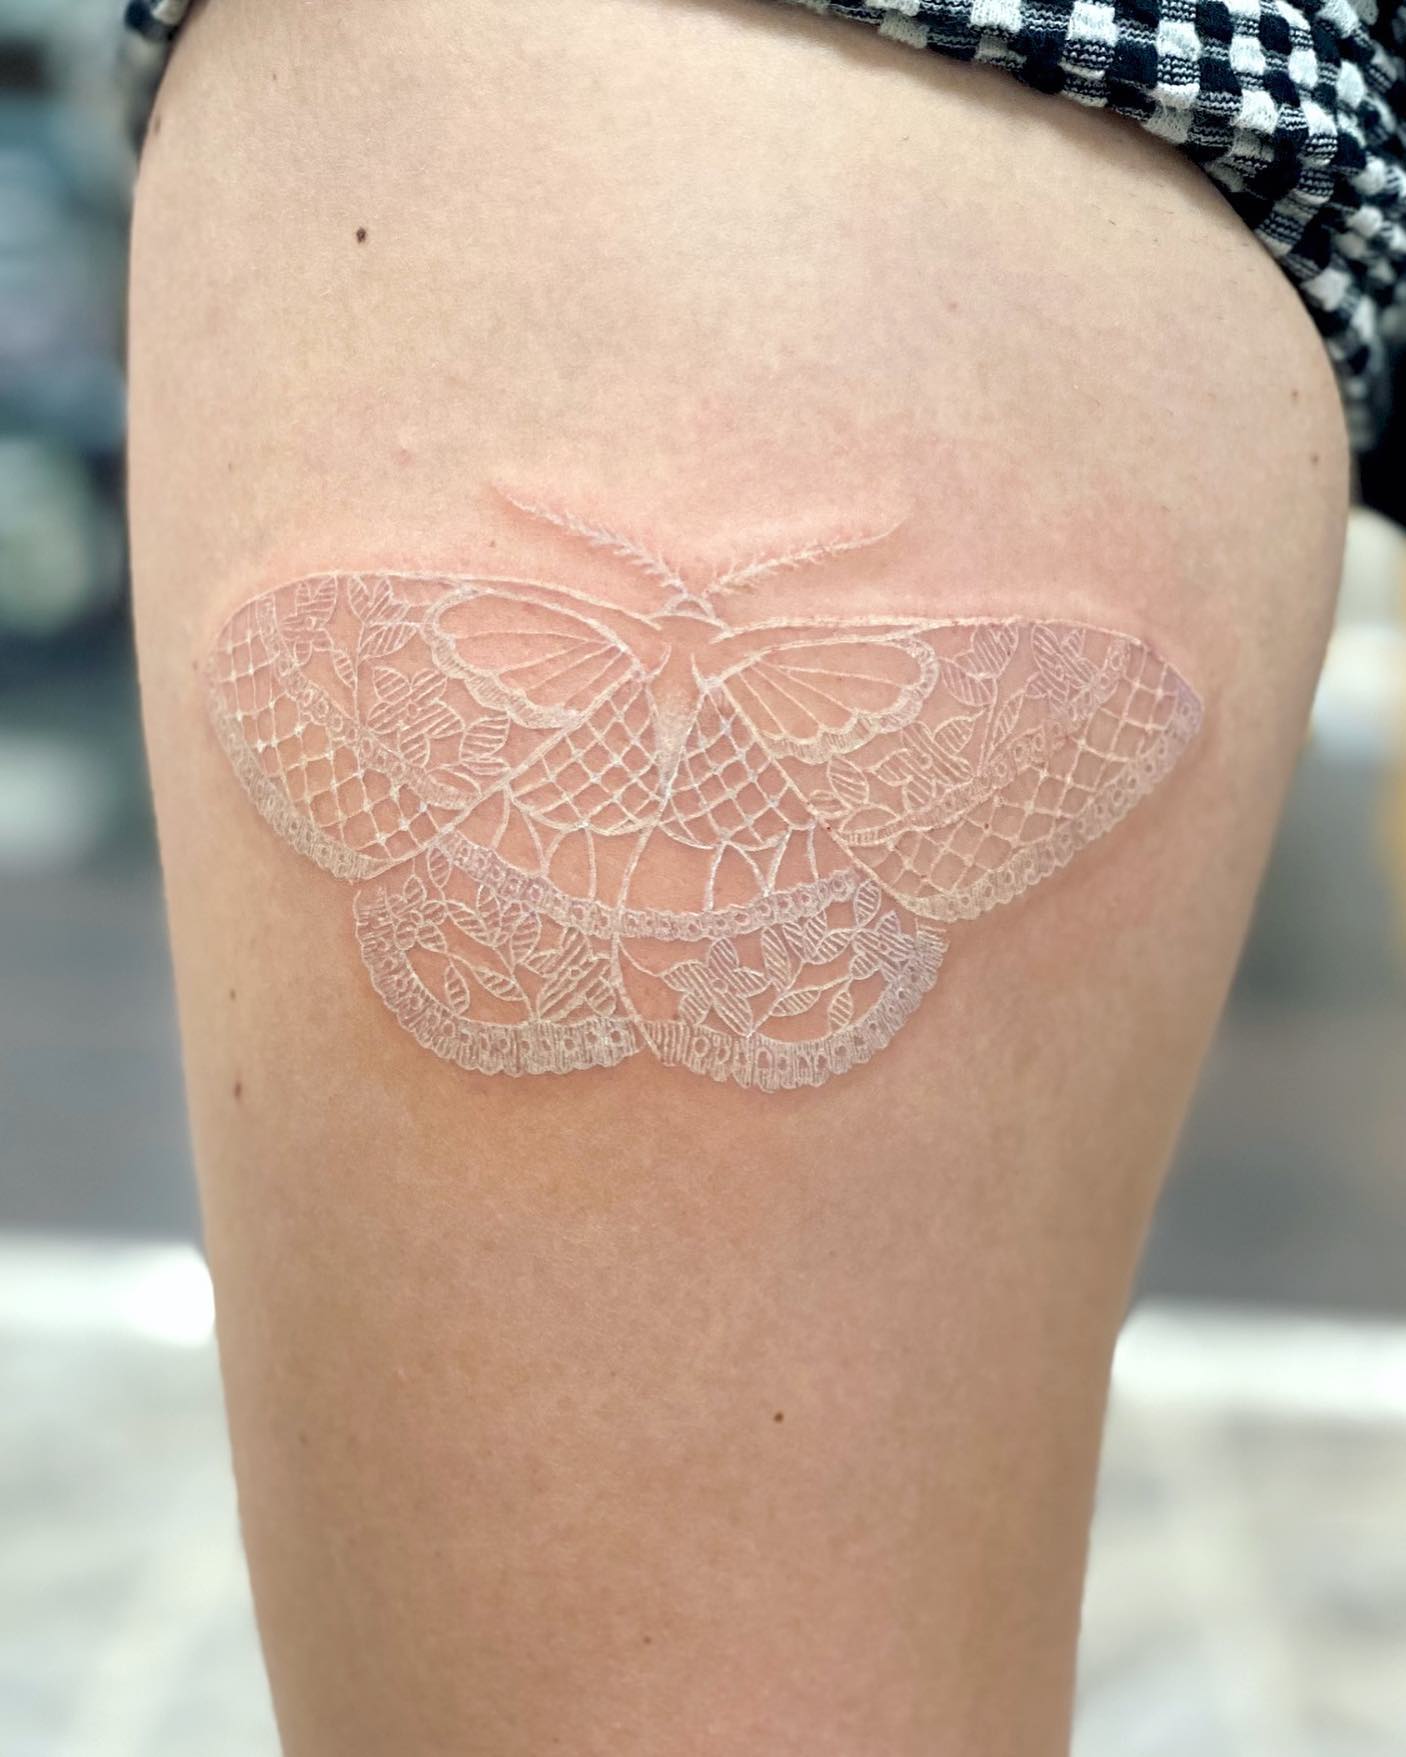 Butterfly tattoos are so pretty in that they offer a cute look. Also, they can be used as a symbol of change or rebirth, which is pretty cool. For its wings, something creative can be used like a lace. Go for a white ink tattoo of it to show its innocence to the fullest.